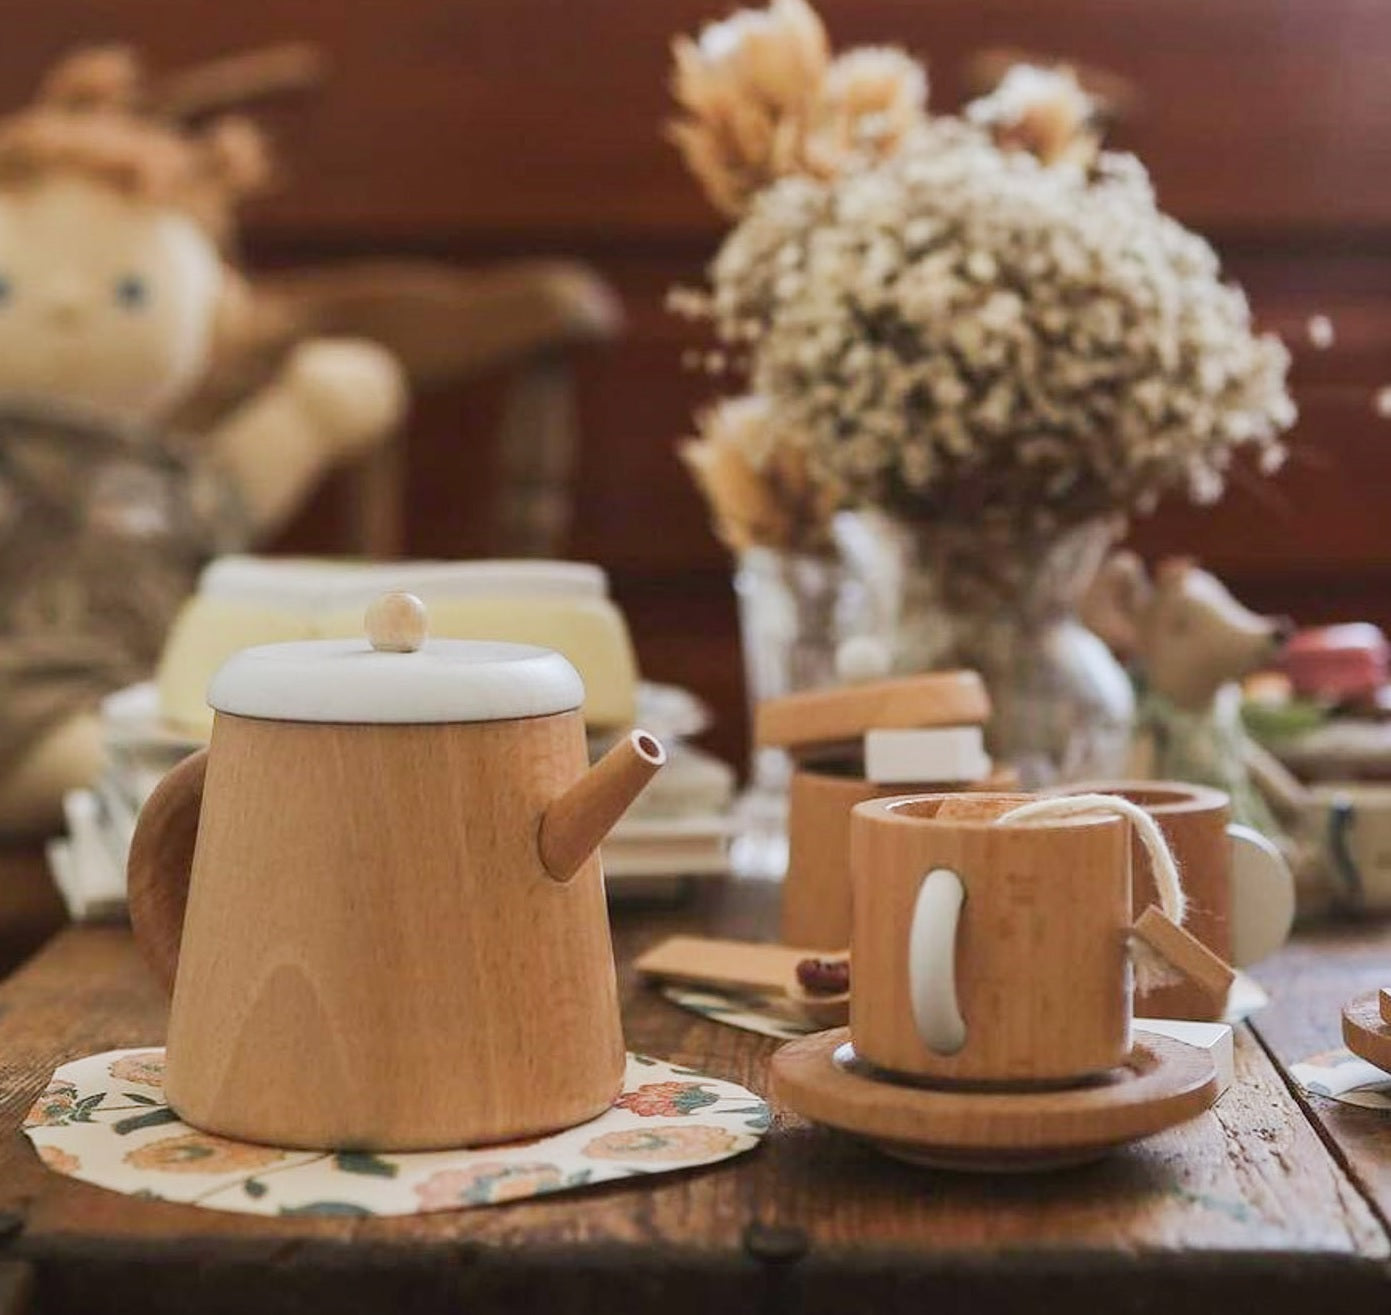 Open-ended imaginative play with our Iconic ☕ Tea Set!